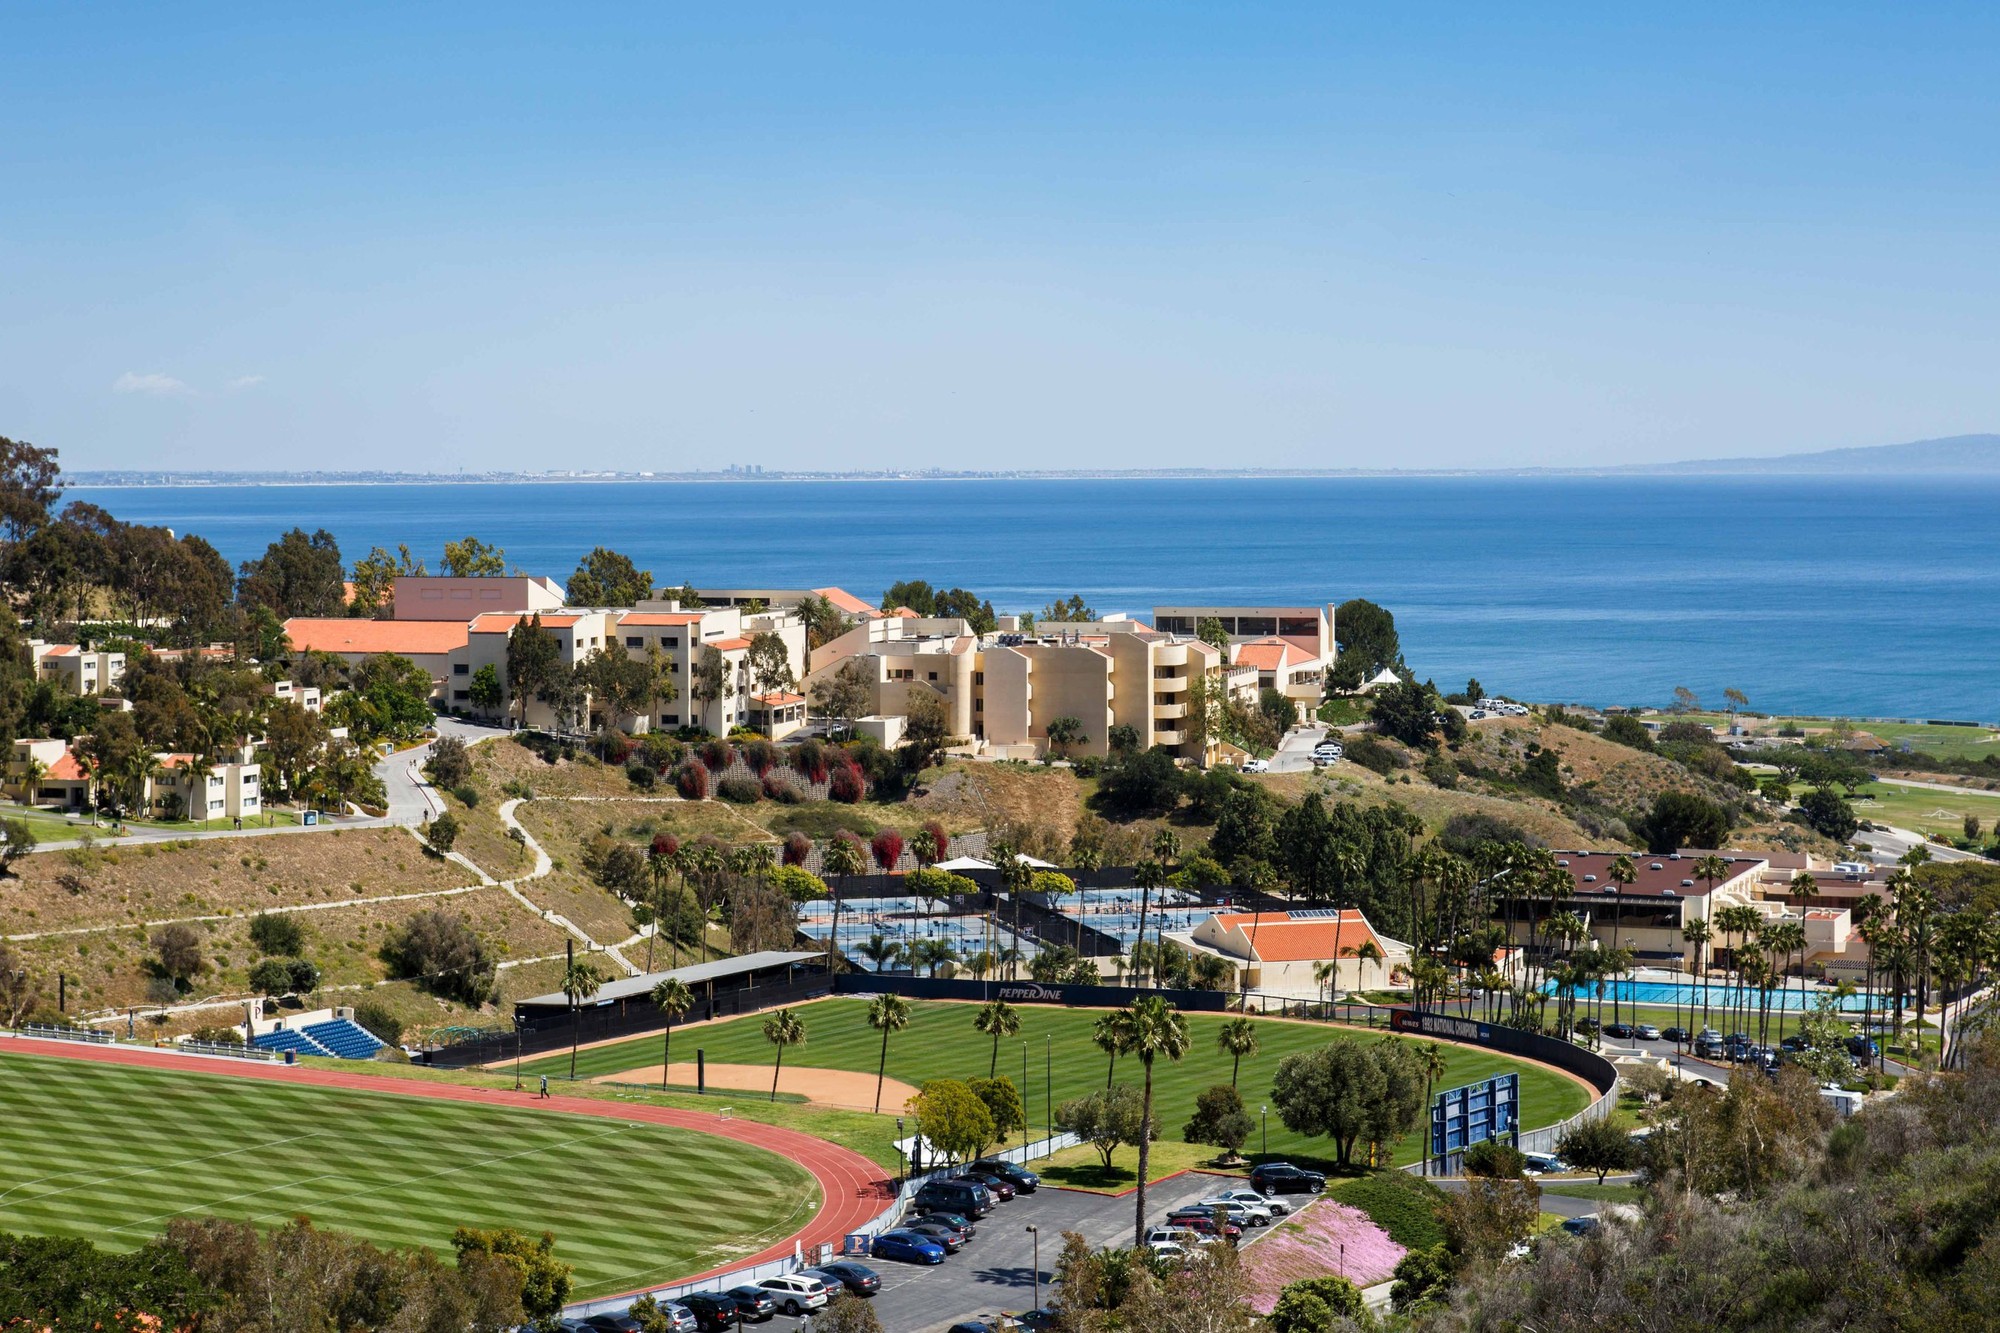 Pepperdine University sports facilities and campus buildings with the Pacific ocean and Los Angeles in the background